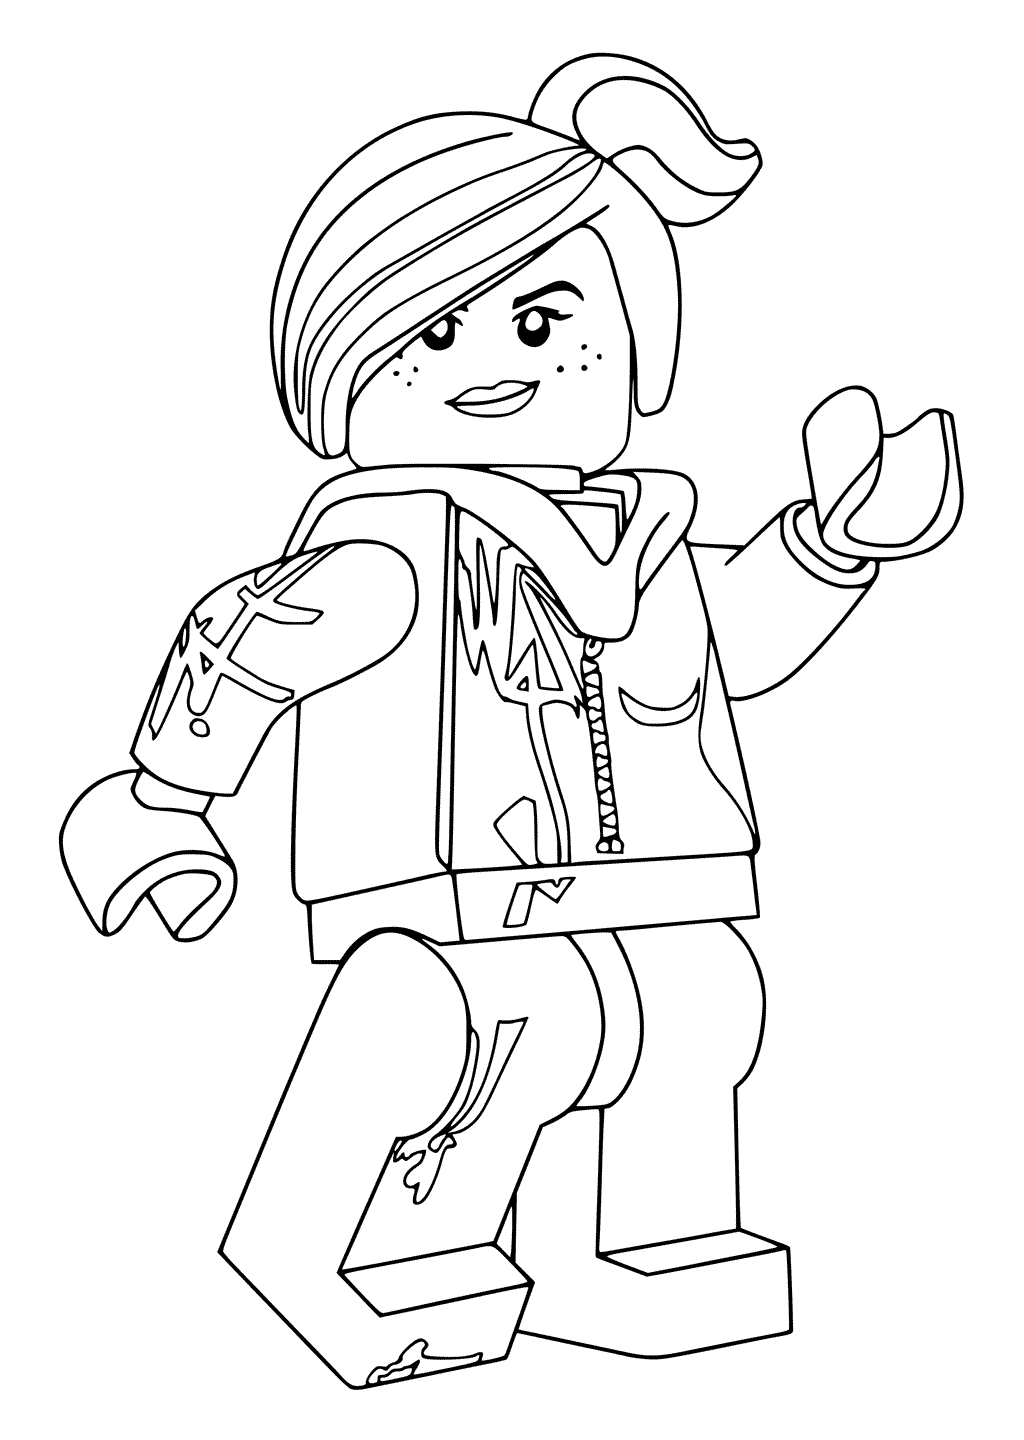 lego movie coloring page lego movie coloring pages best coloring pages for kids coloring lego movie page 